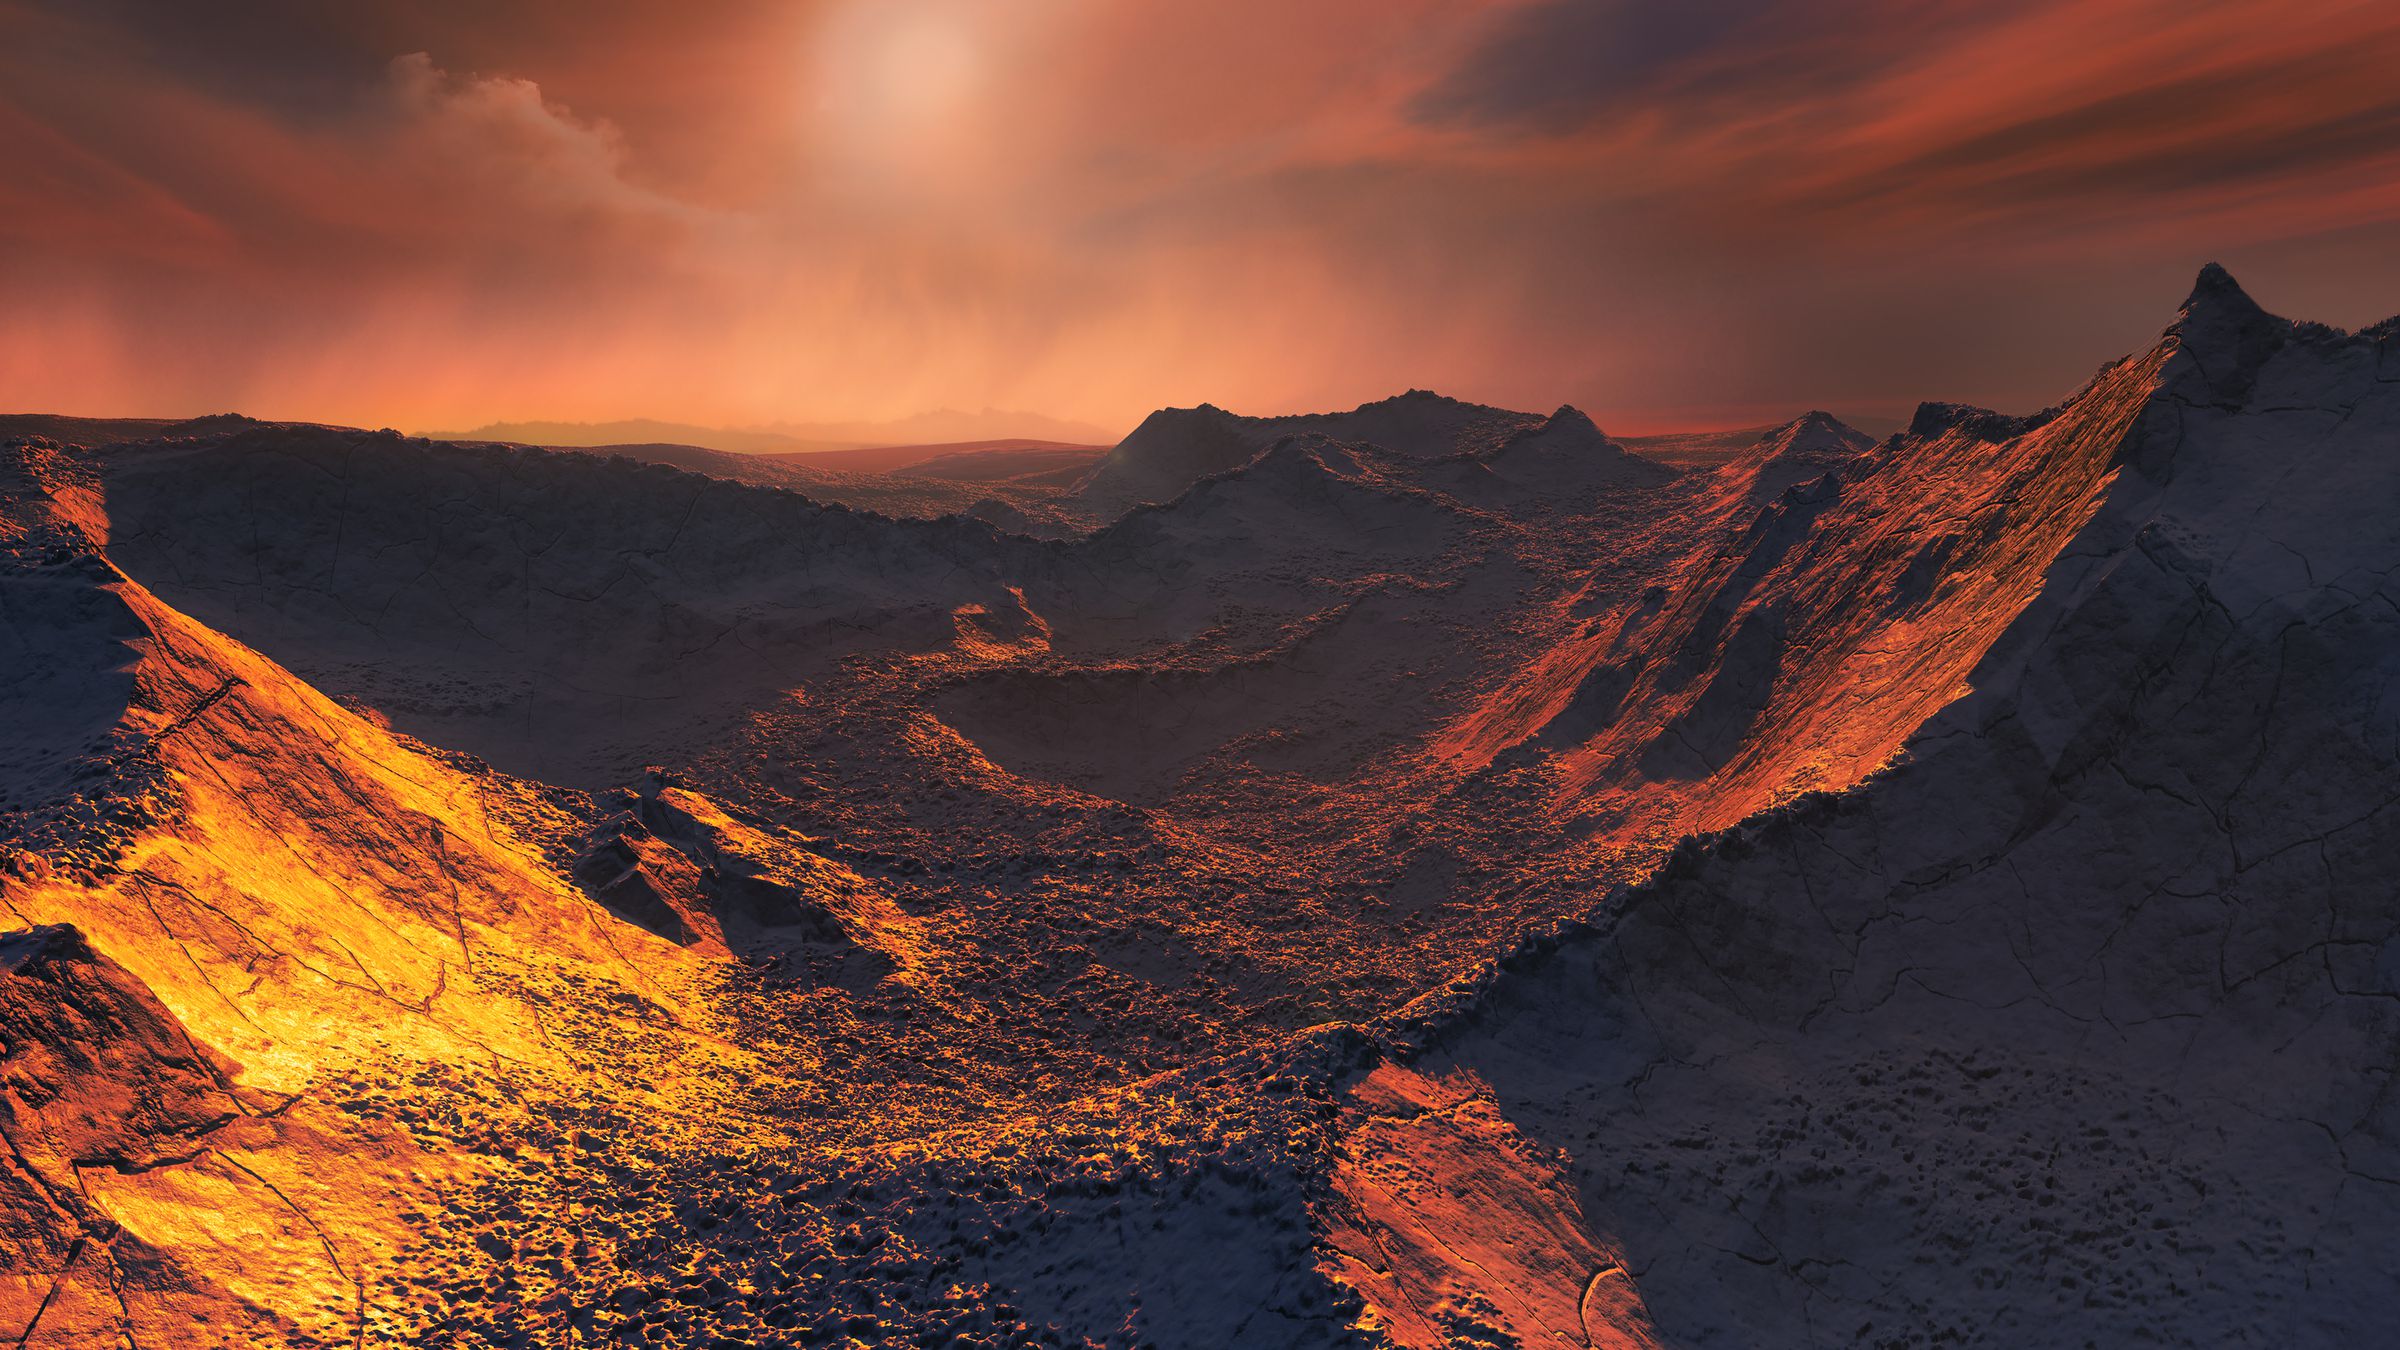 An artistic rendering of what the surface of the planet around Barnard’s star might look like (though we haven’t actually seen it yet).